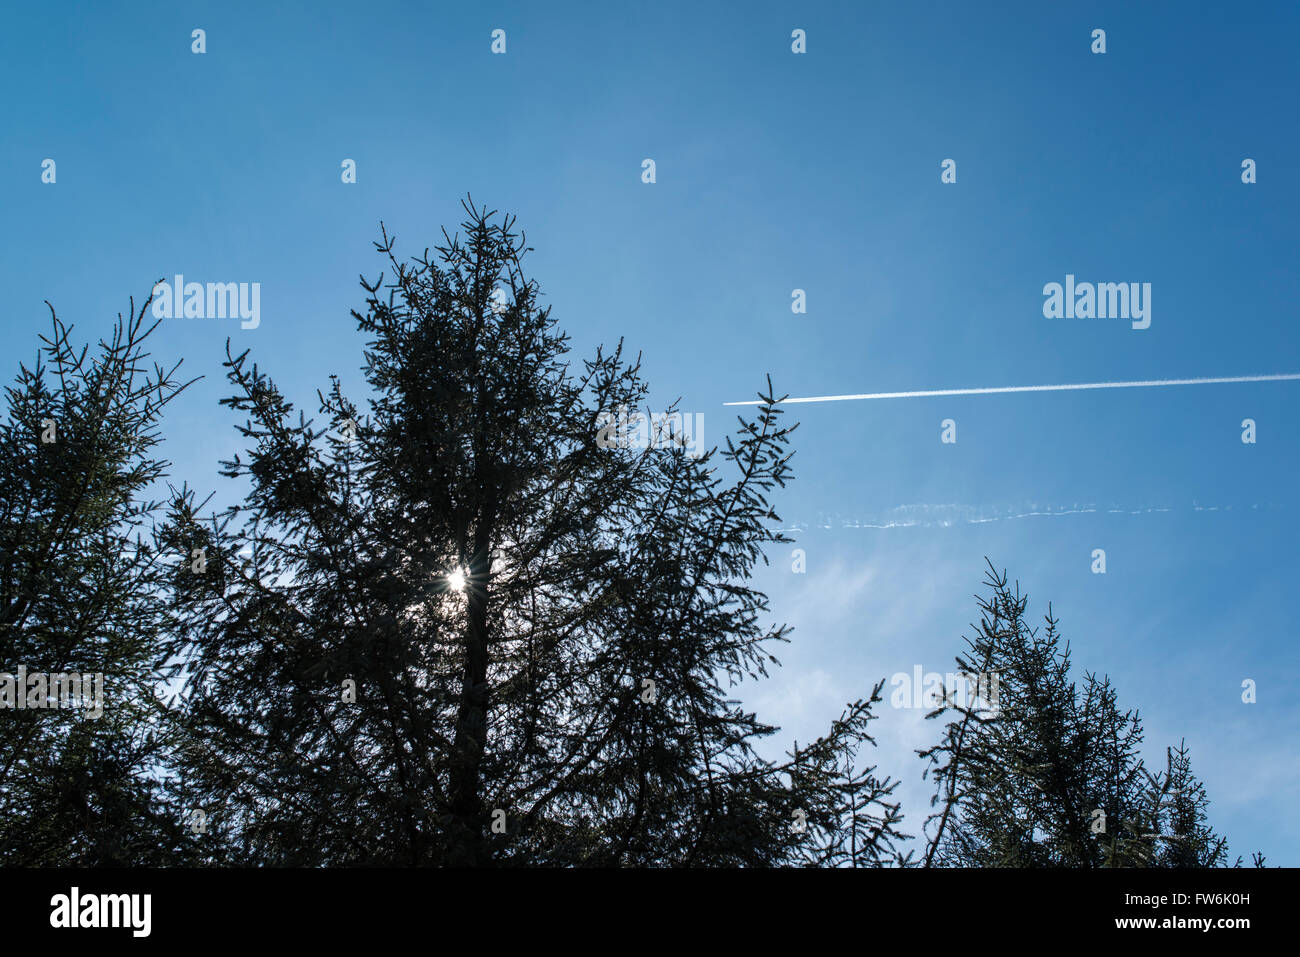 Plane and vapor trail in a blue sky, the sun behind silhouetted trees. Stock Photo